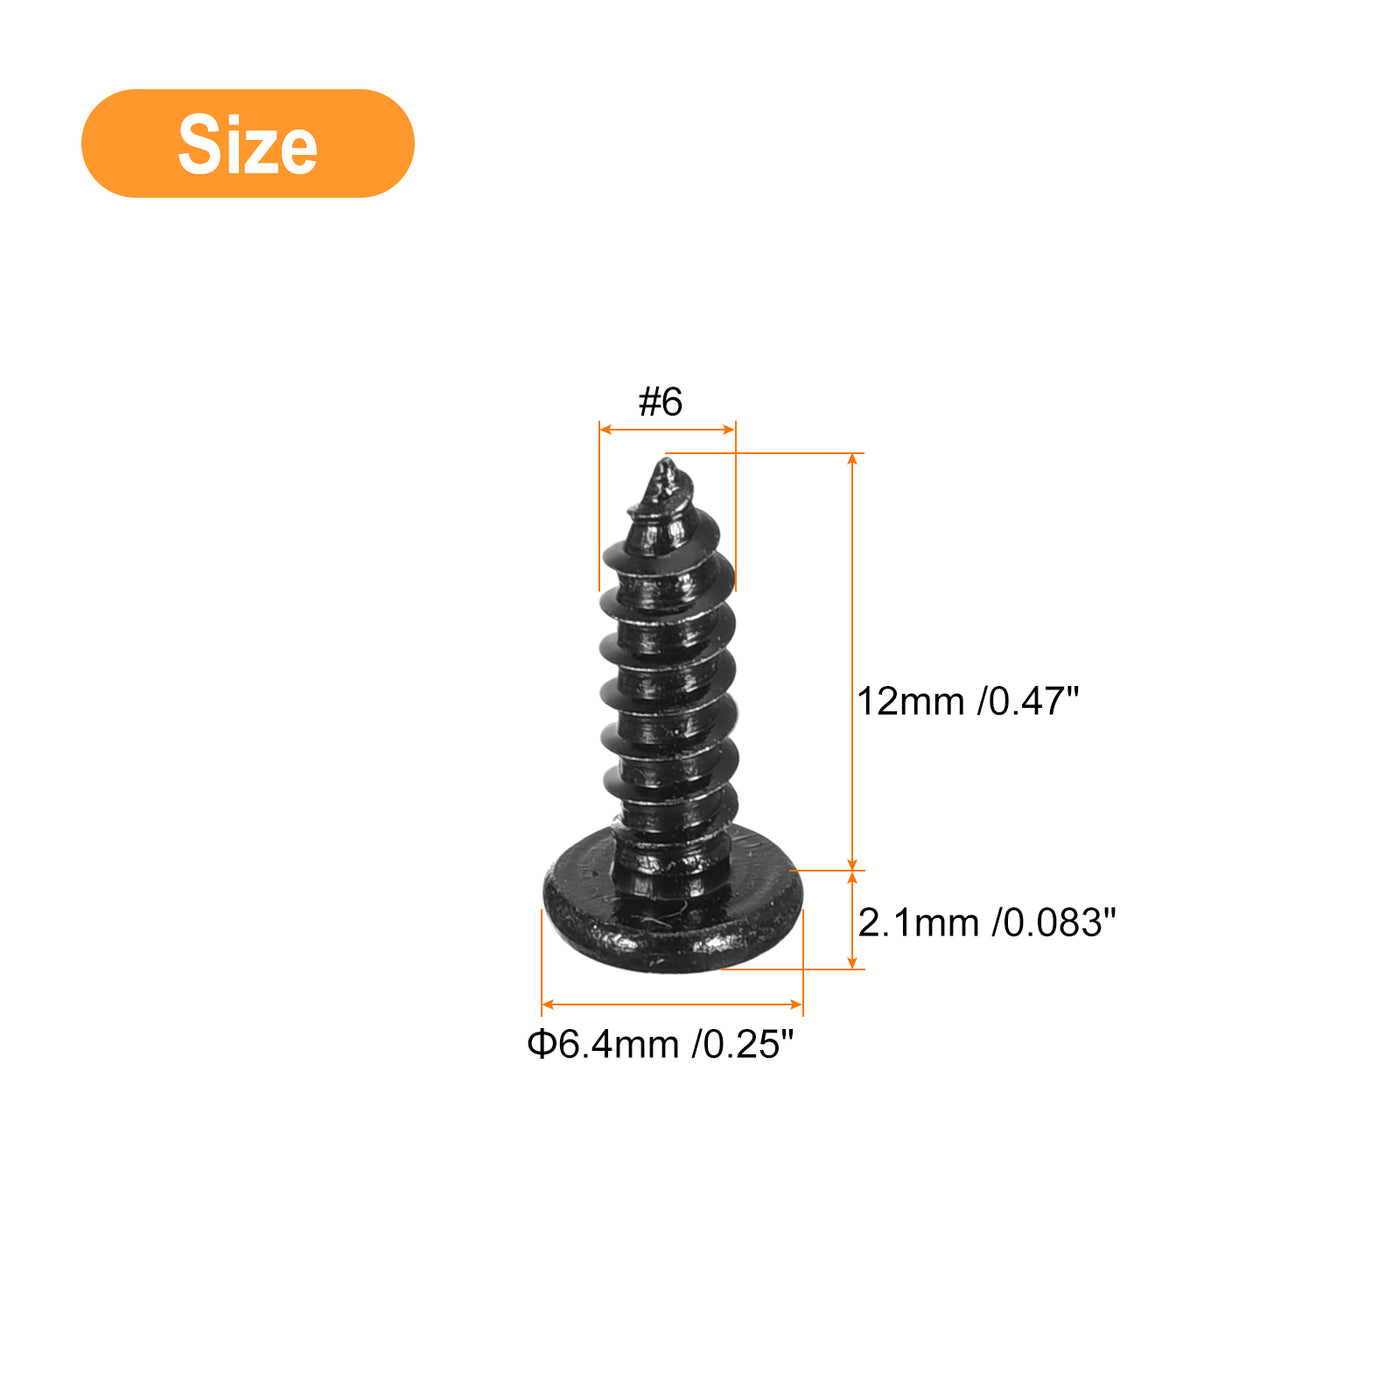 uxcell Uxcell #6 x 1/2" Phillips Pan Head Self-tapping Screw, 50pcs - 304 Stainless Steel Round Head Wood Screw Full Thread (Black)